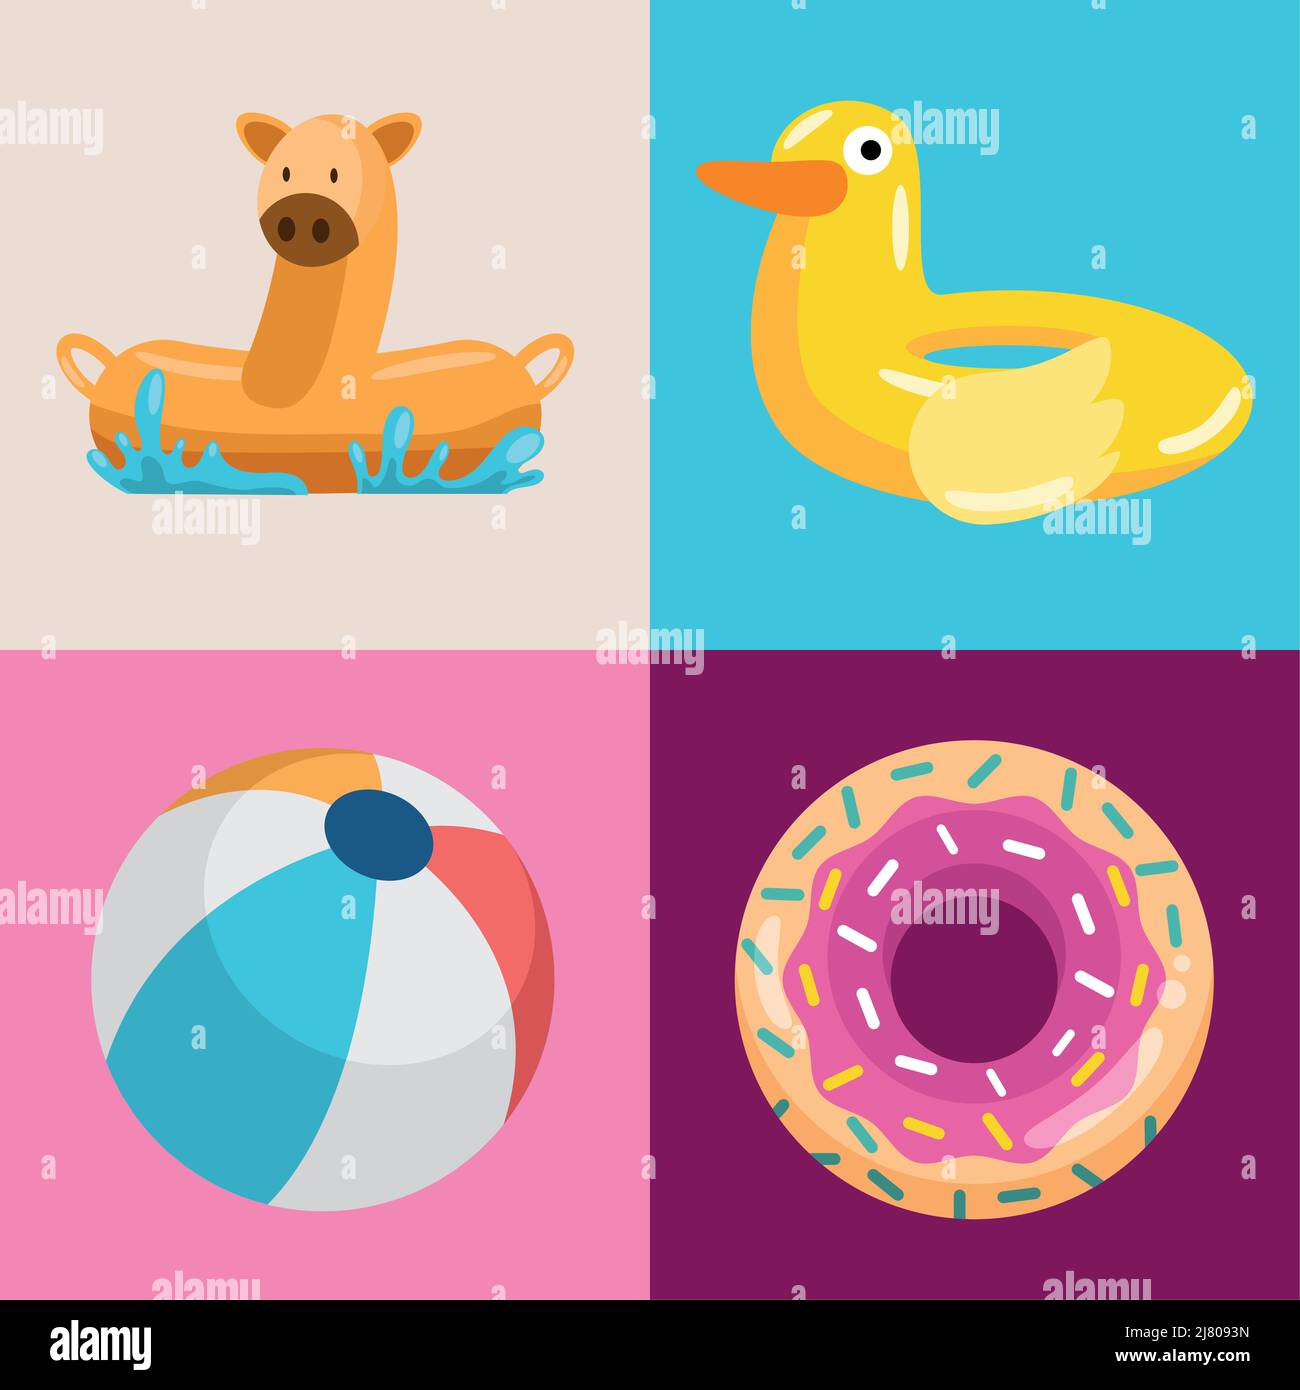 Inflatables Stock Vector Images - Alamy